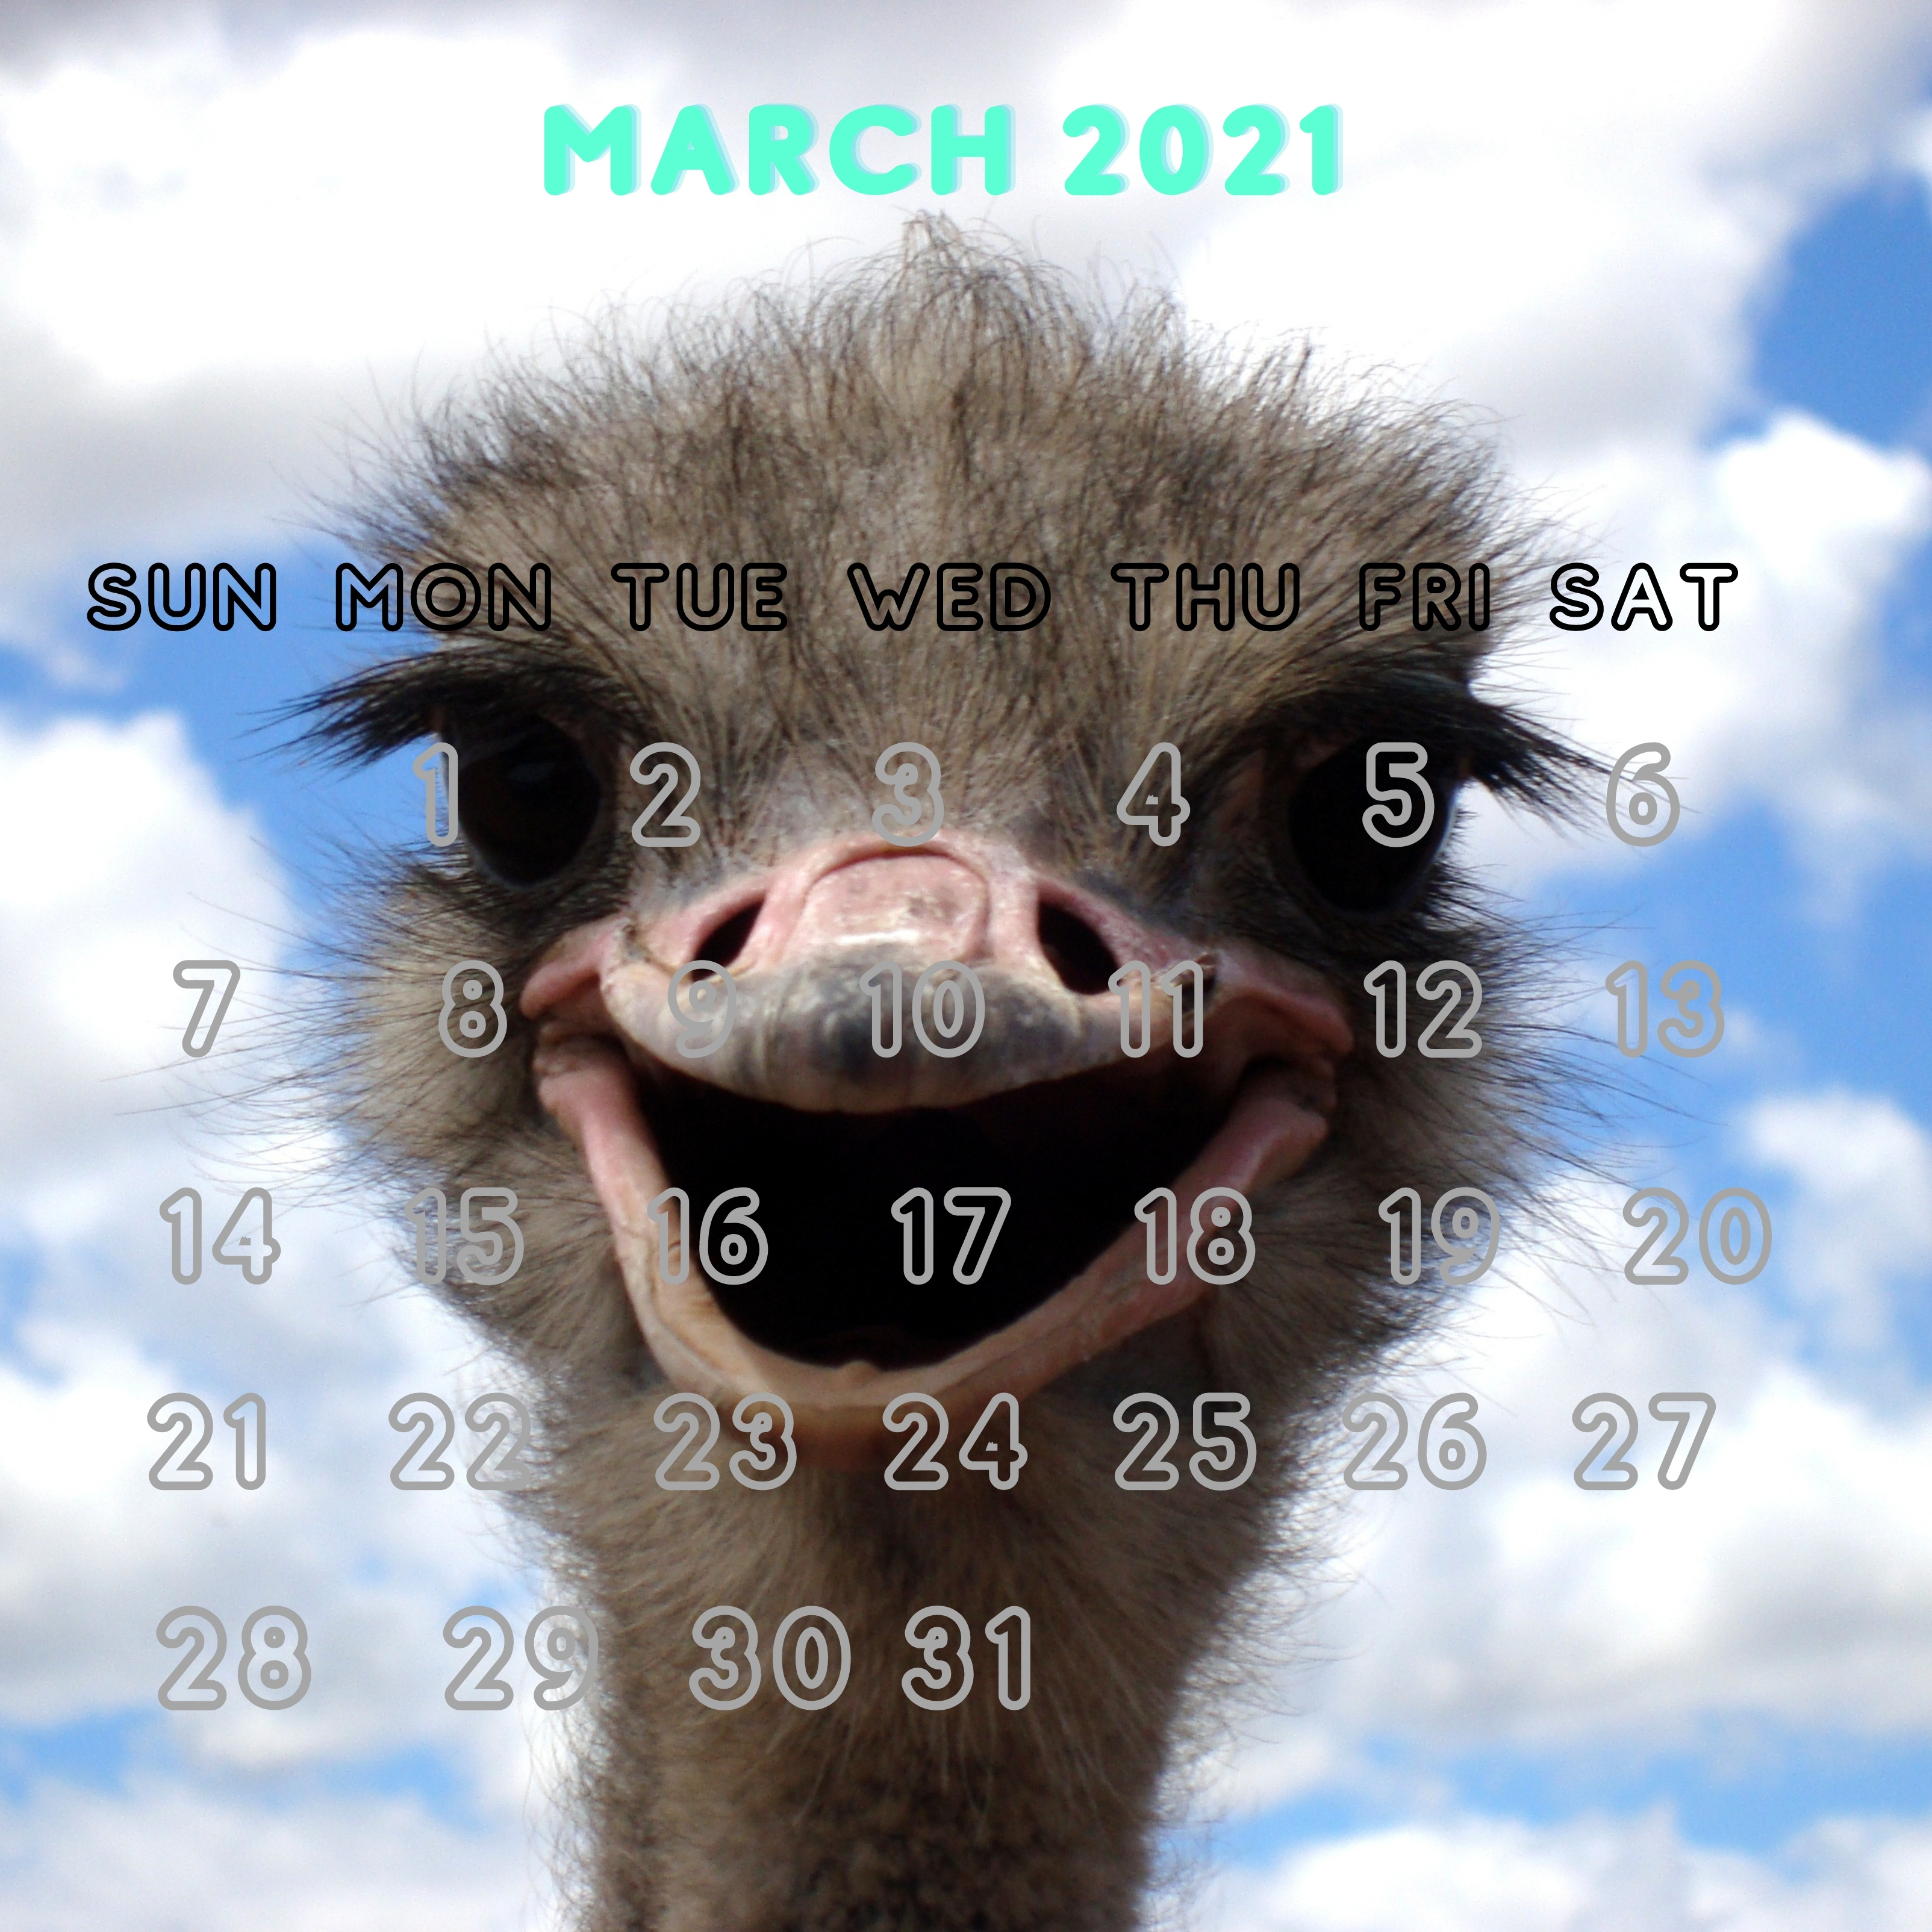 iPad Wallpapers March 2021 Ostrich Smiling iPad Wallpaper 3208x3208 px